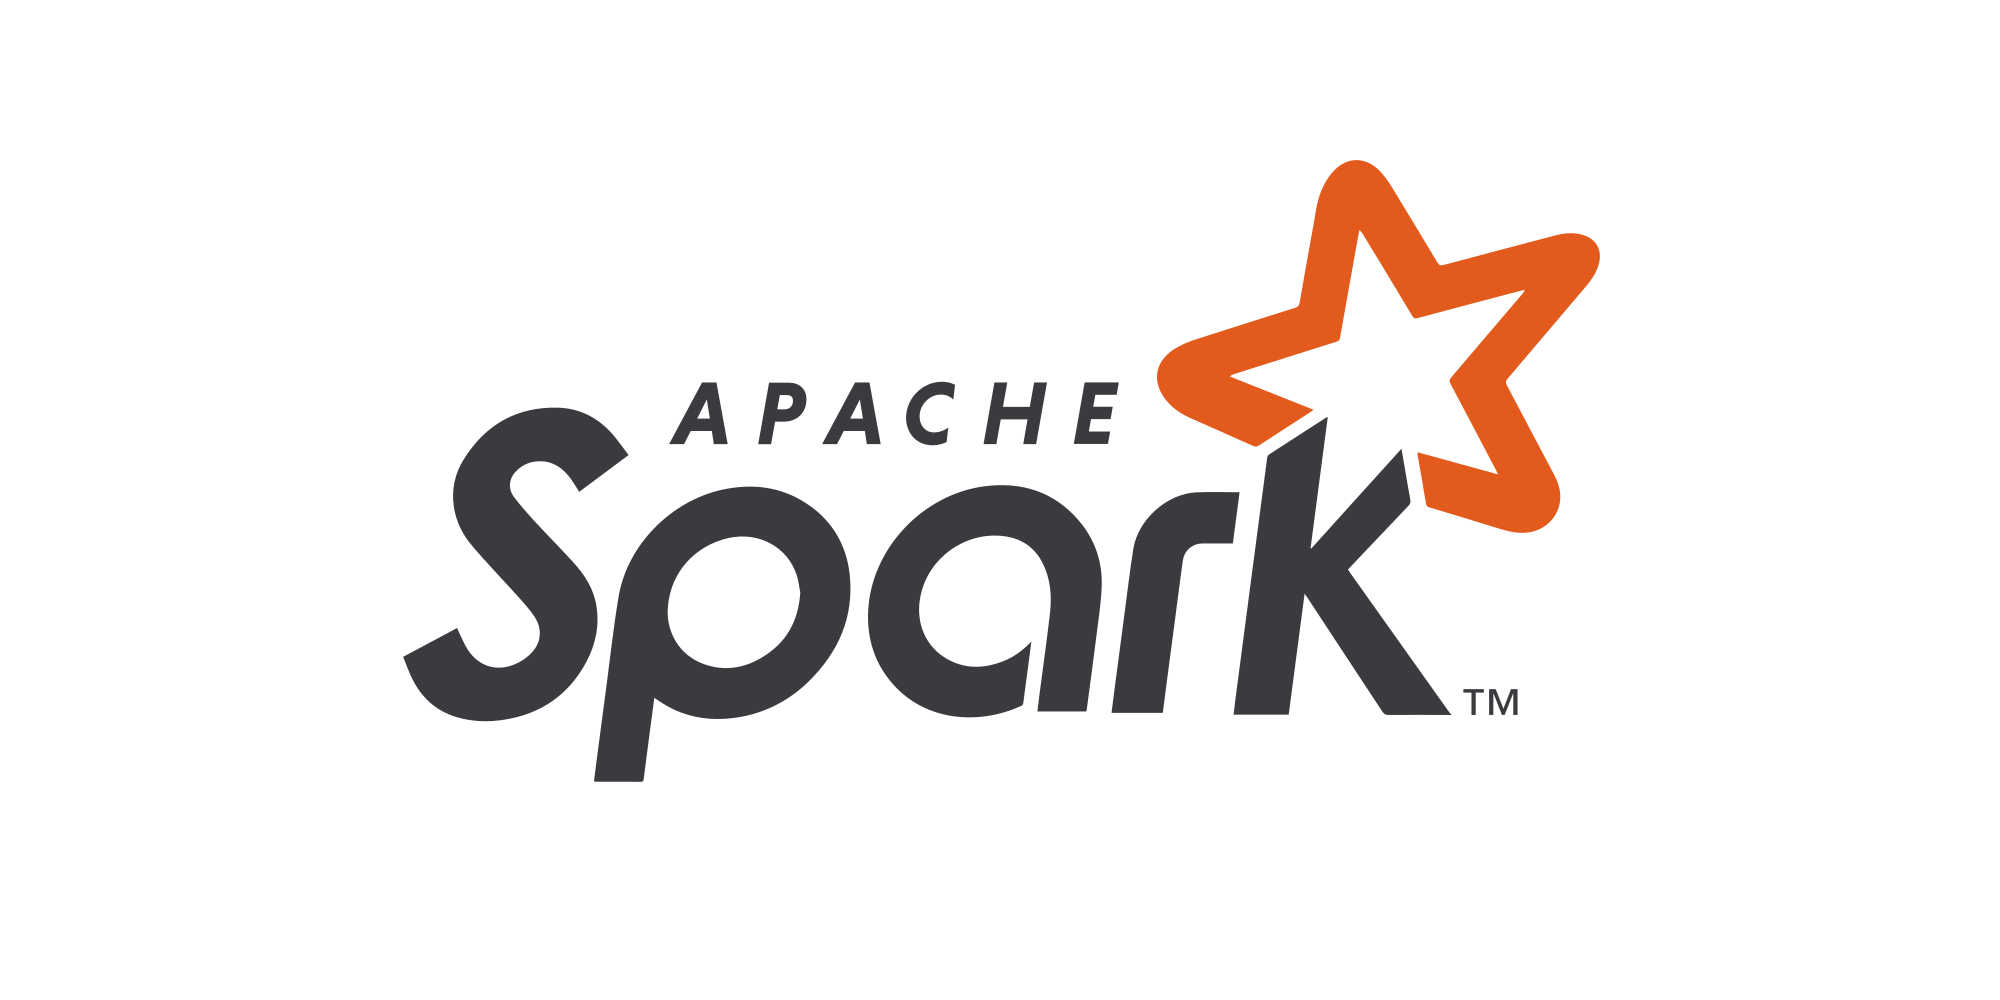 What are Apache Spark and distributed computing?